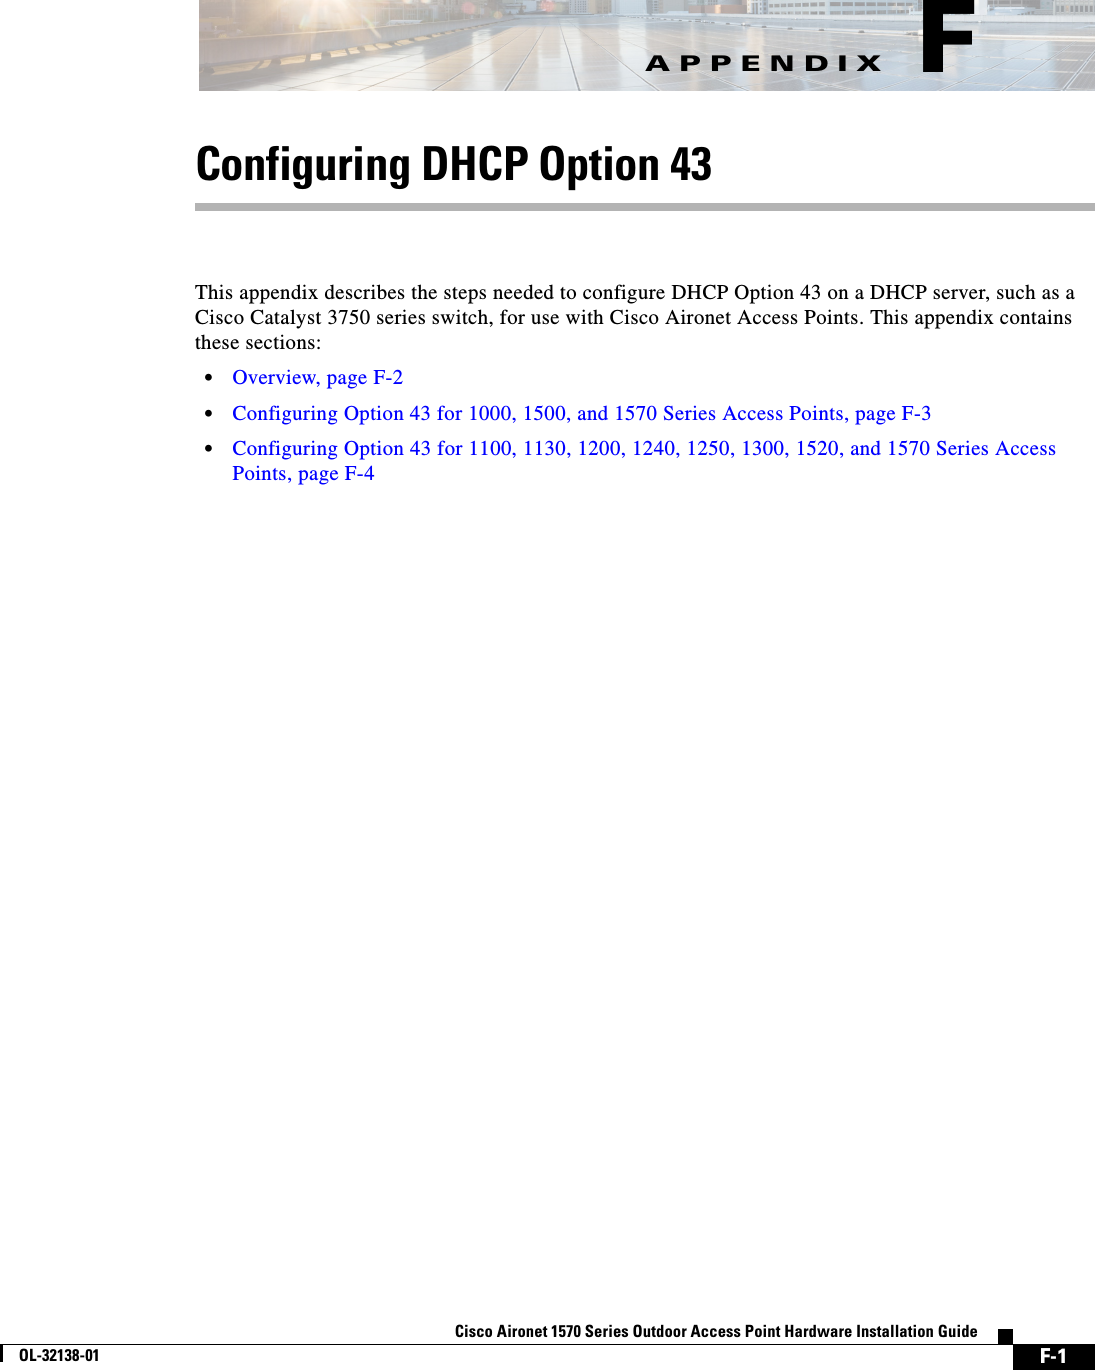 F-1Cisco Aironet 1570 Series Outdoor Access Point Hardware Installation GuideOL-32138-01APPENDIX FConfiguring DHCP Option 43This appendix describes the steps needed to configure DHCP Option 43 on a DHCP server, such as a Cisco Catalyst 3750 series switch, for use with Cisco Aironet Access Points. This appendix contains these sections:•Overview, page F-2•Configuring Option 43 for 1000, 1500, and 1570 Series Access Points, page F-3•Configuring Option 43 for 1100, 1130, 1200, 1240, 1250, 1300, 1520, and 1570 Series Access Points, page F-4